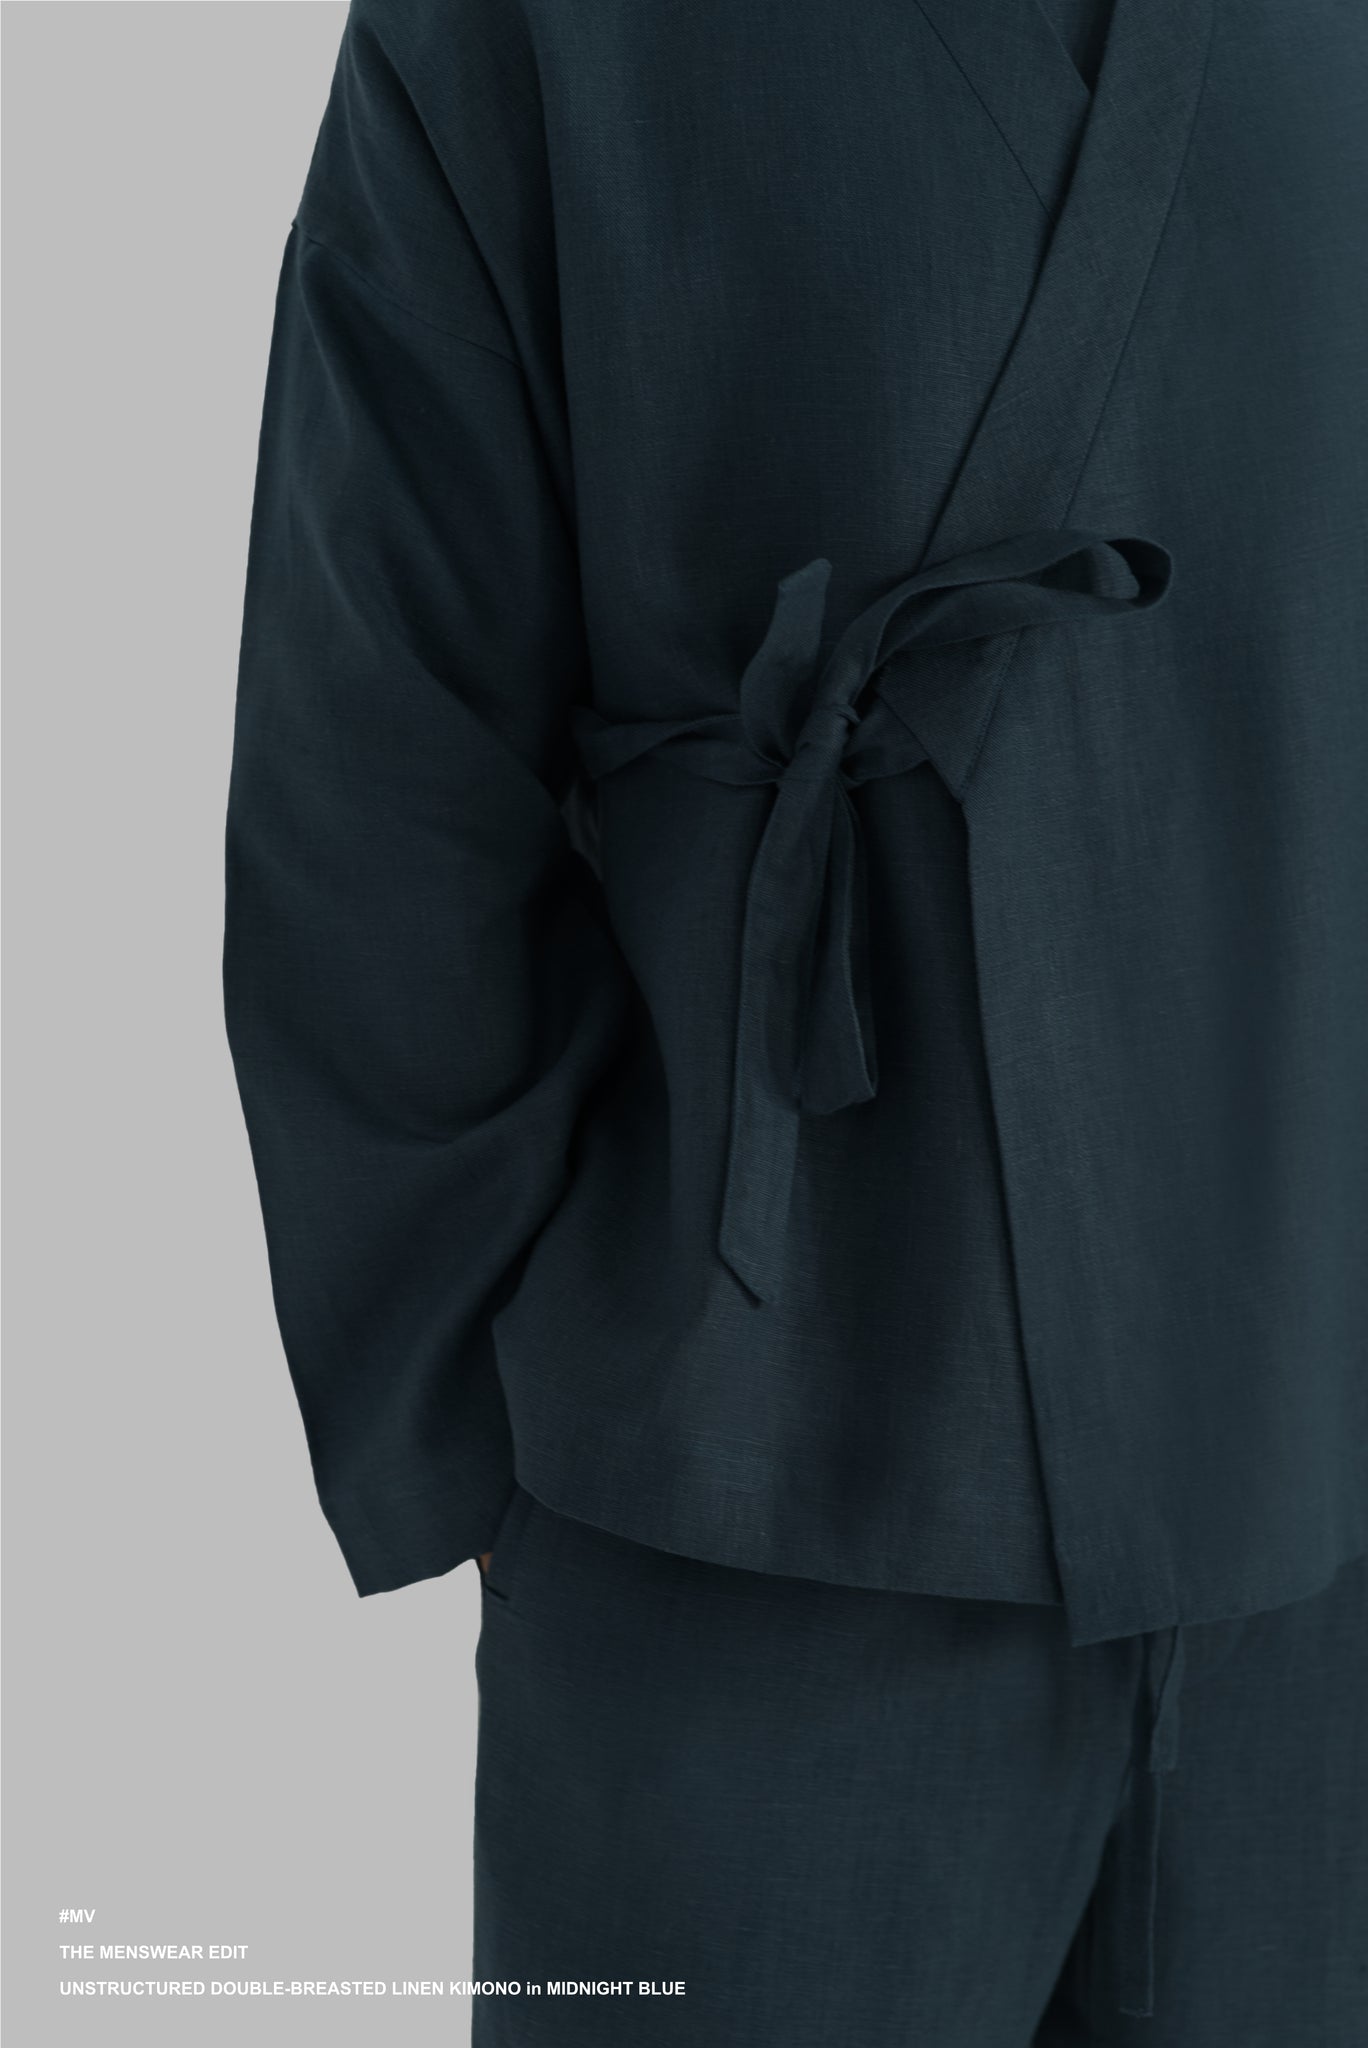 UNSTRUCTURED DOUBLE-BREASTED LINEN KIMONO in MIDNIGHT BLUE